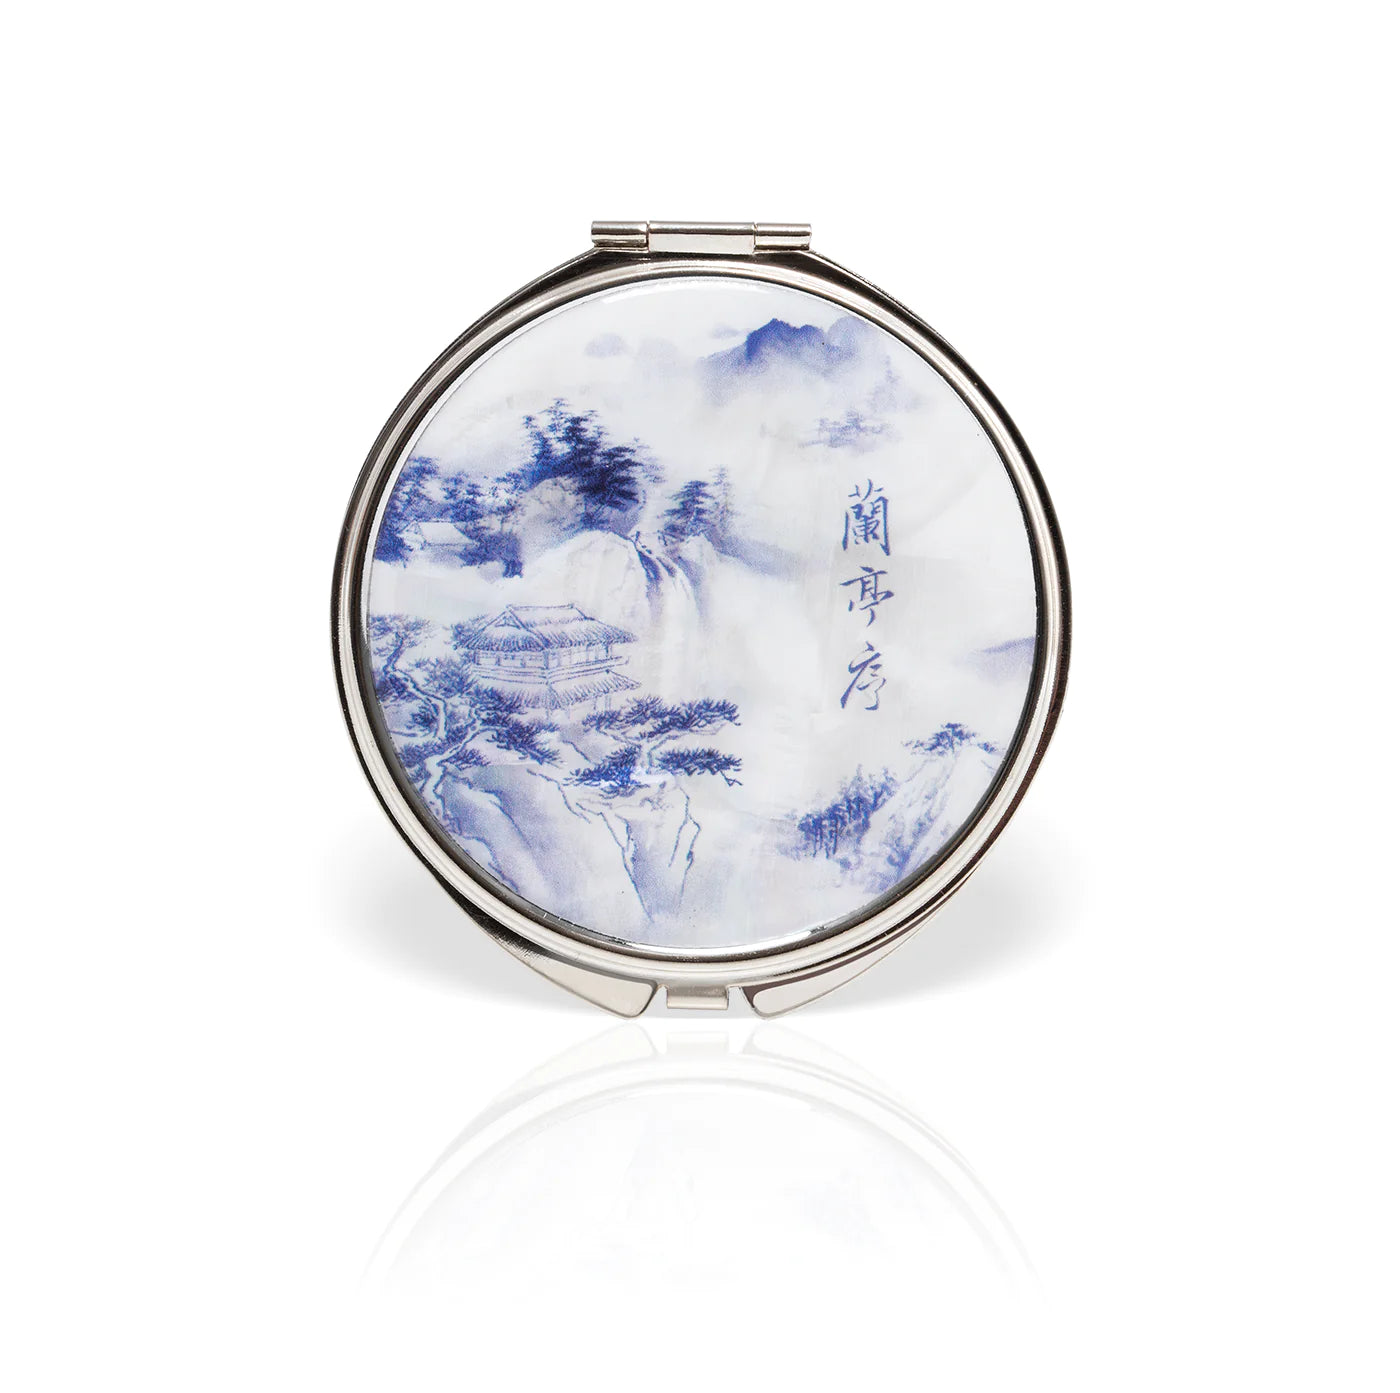 Poets of the Orchid Pavilion Compact Mirror 2019